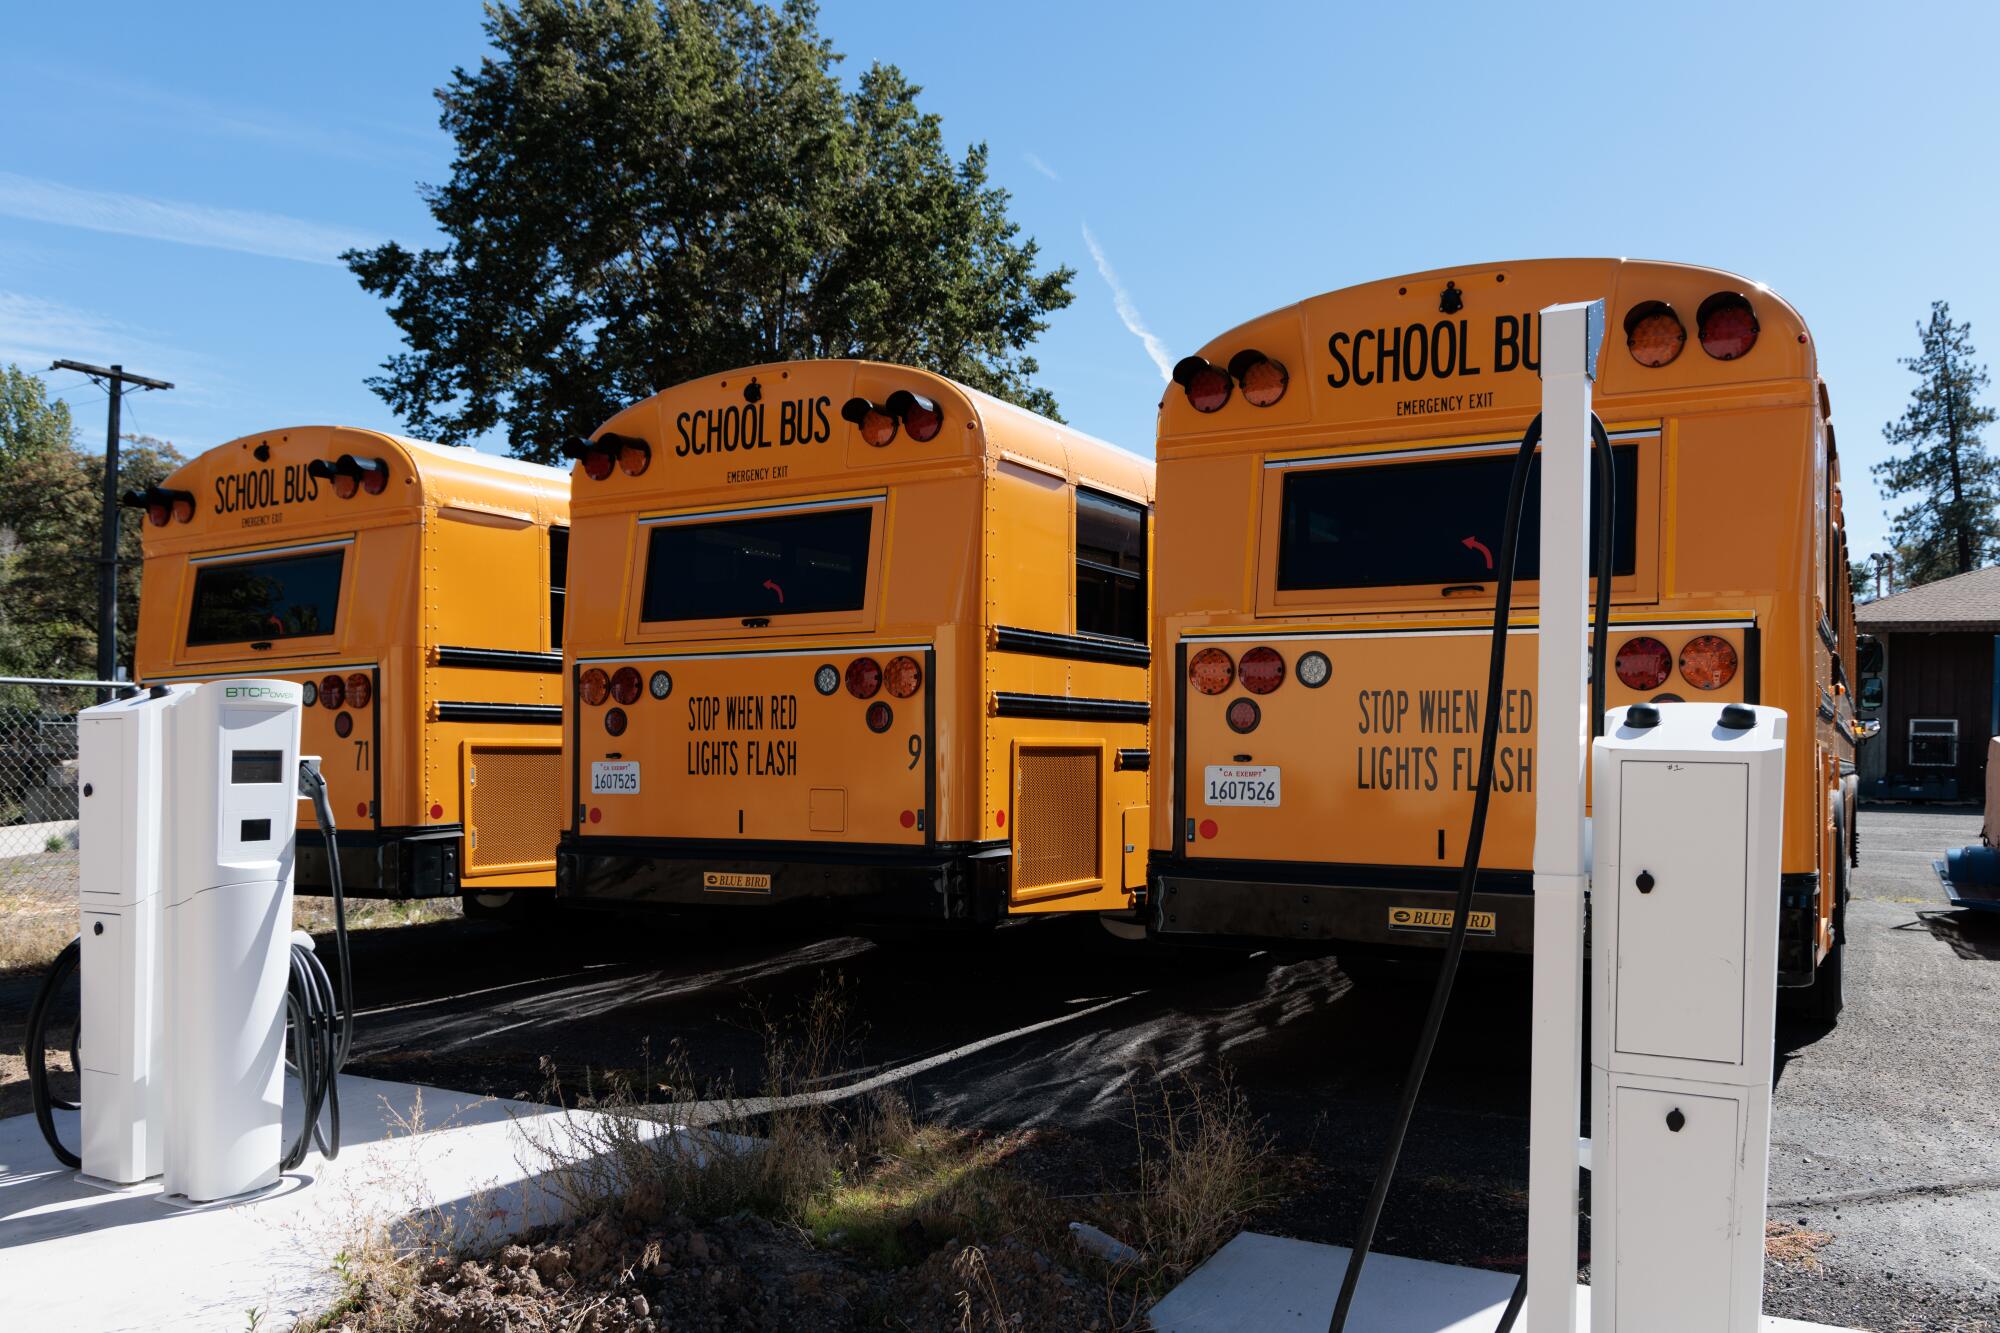 Three yellow school buses are parked behind two white, short, vertical structures with cords attached.